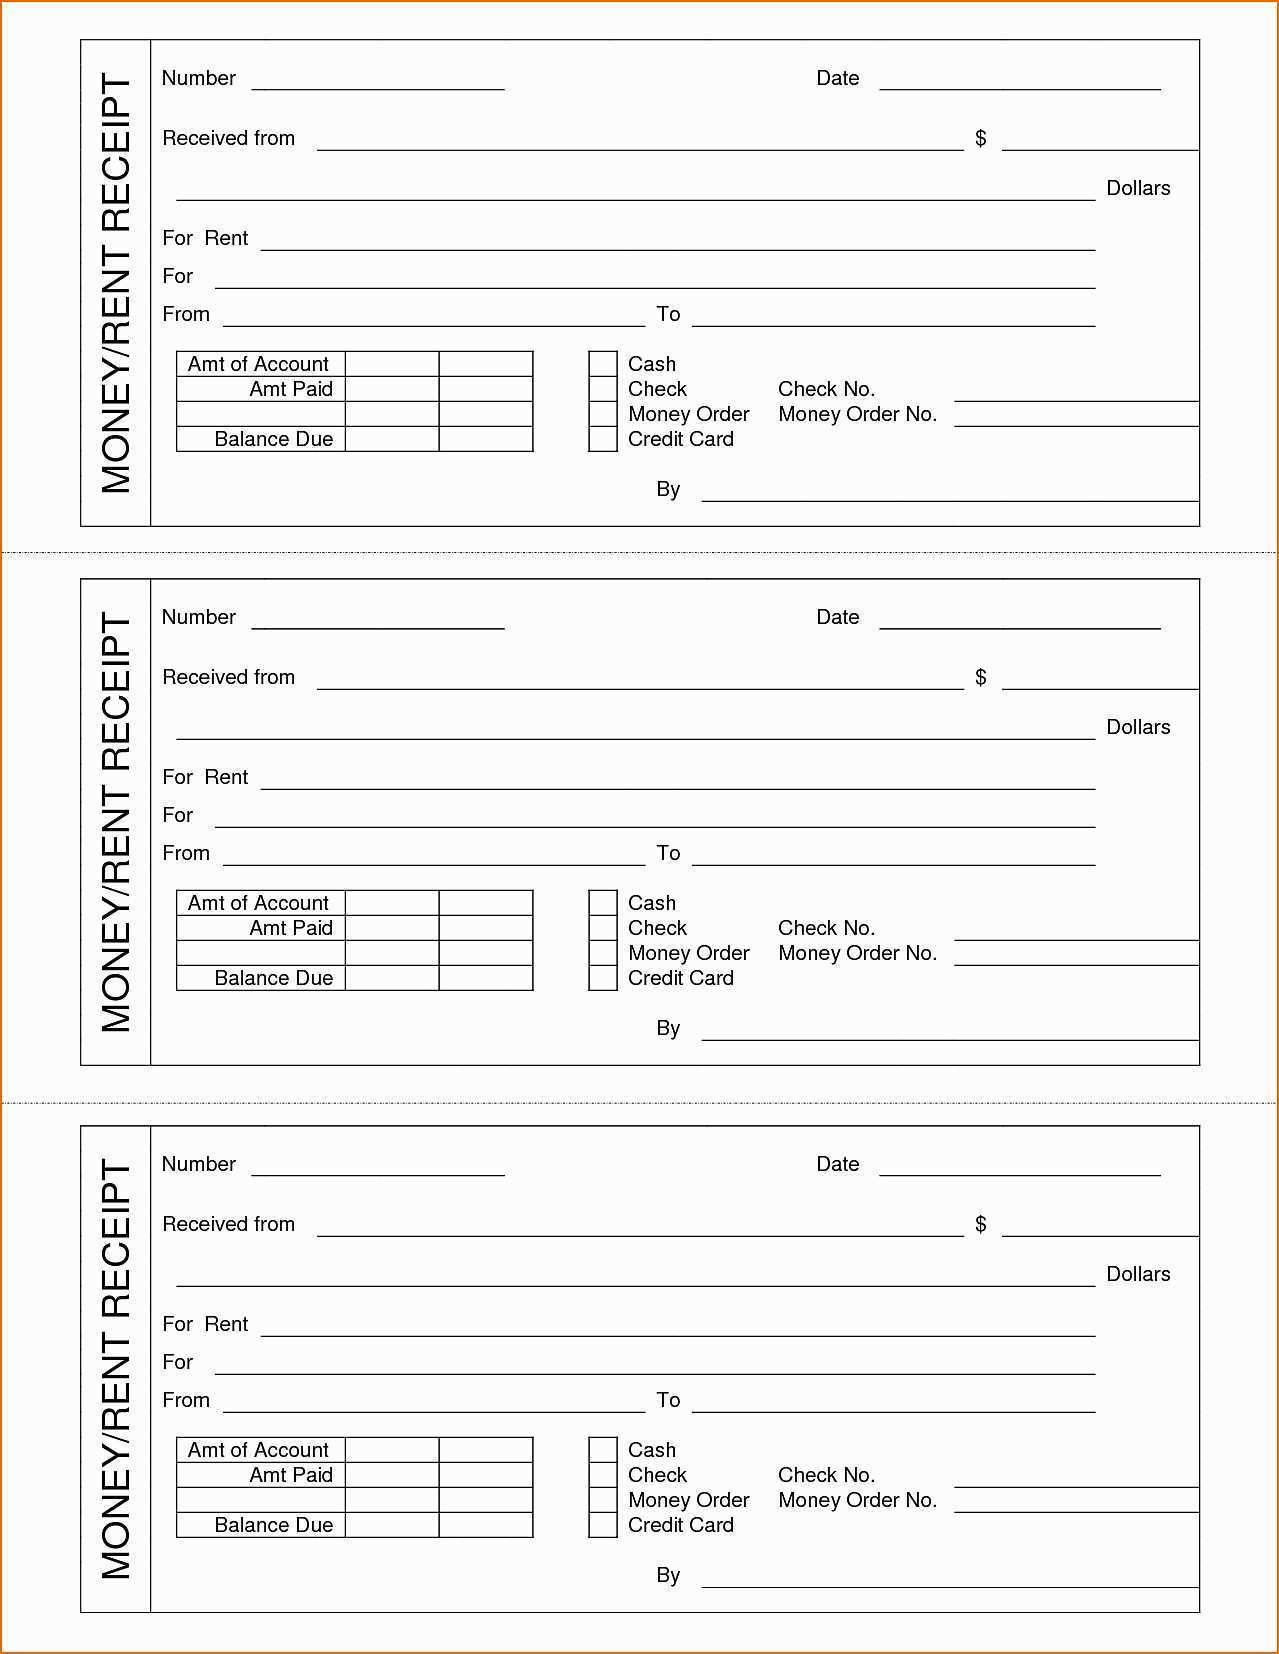 36 Visiting Blank Receipt Template Pdf With Stunning Design with Blank Receipt Template Pdf